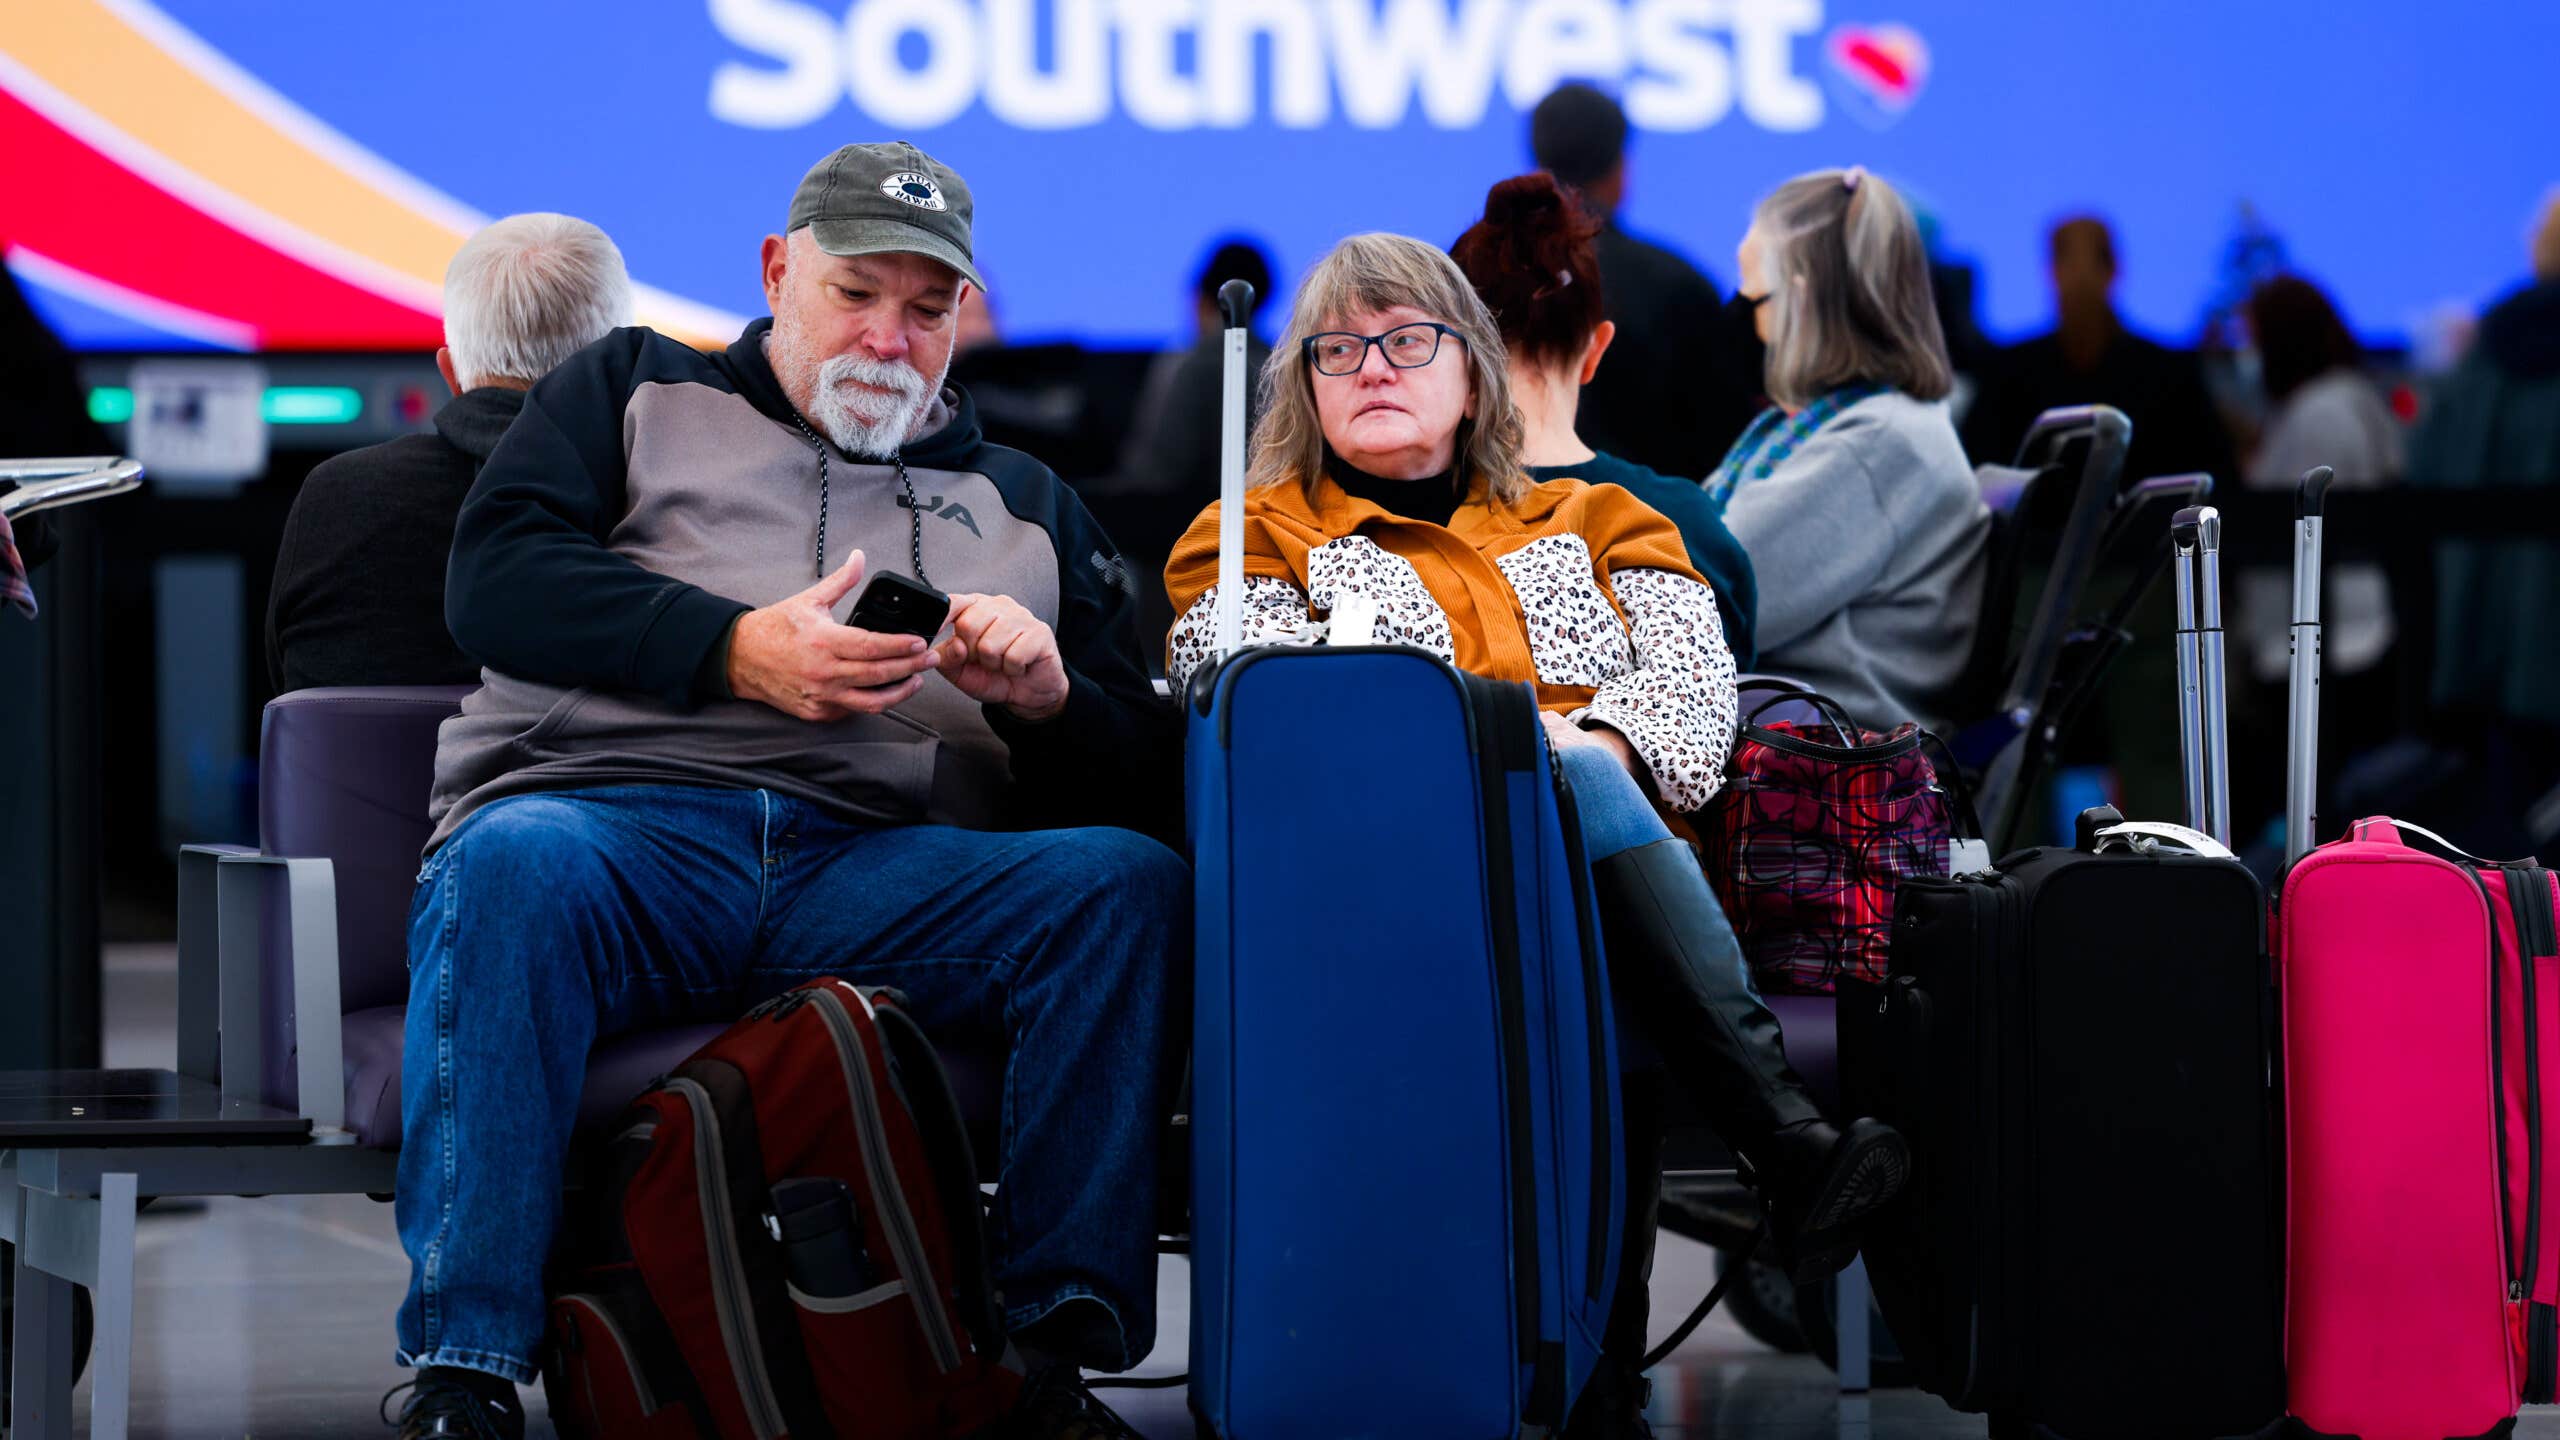 How Can I Get A Credit Card Refund For My Canceled Southwest Flight?